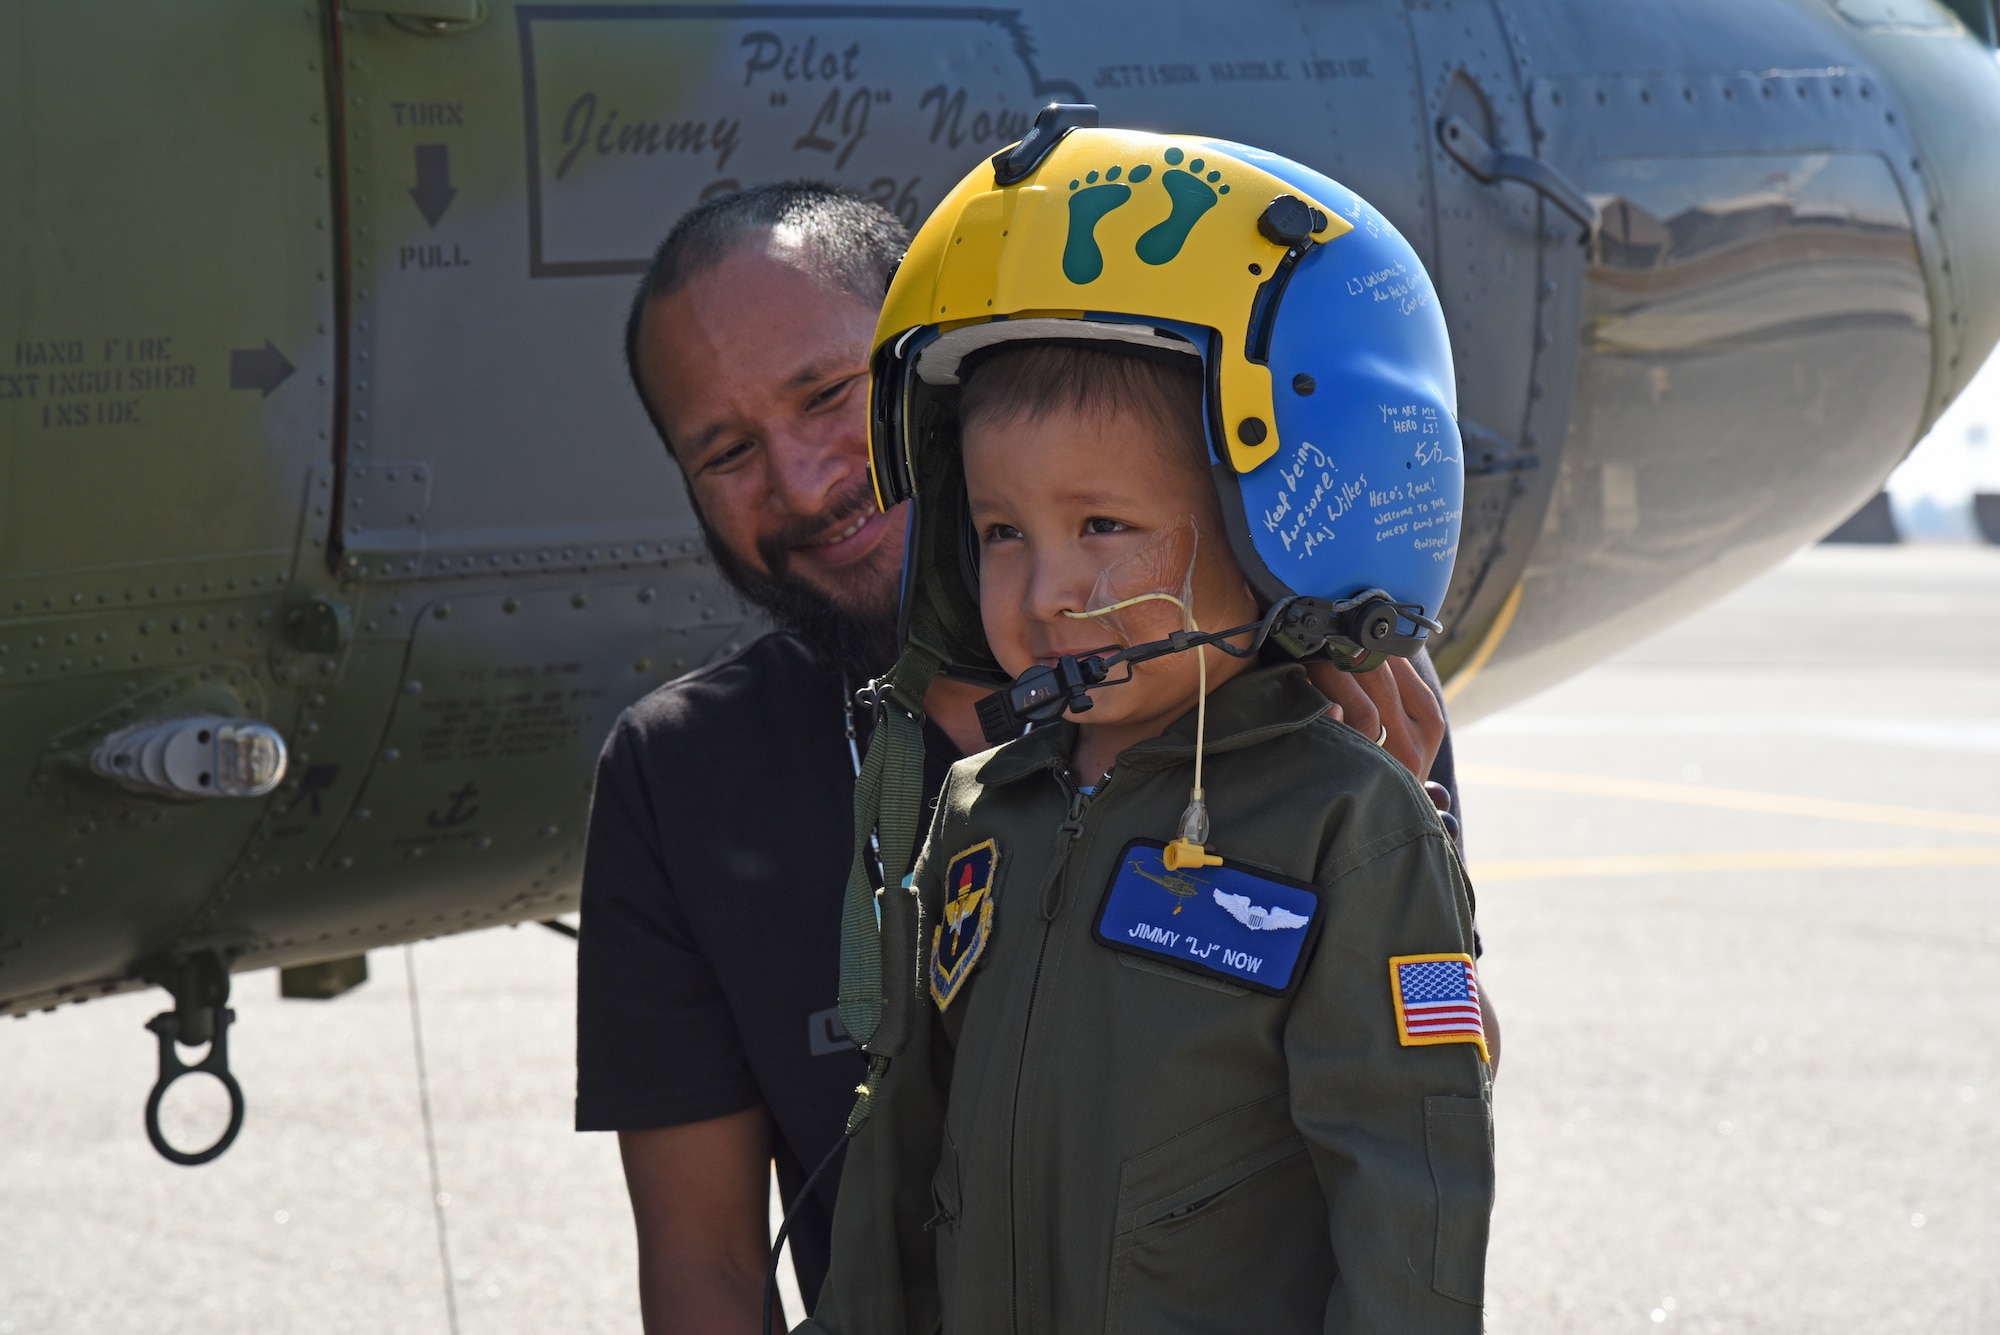 Jimmy Now helps Jimmy "LJ" Now try on his personalized helmet given to him by the 36th Rescue Squadron during his visit Sept. 7, 2018, at Fairchild Air Force, Washington. Following military tradition, the 36th also provided LJ with a call sign, painting his name and “Blade 36” on the door of the helicopter. (U.S. Air Force photo/Staff Sgt. Mackenzie Mendez)